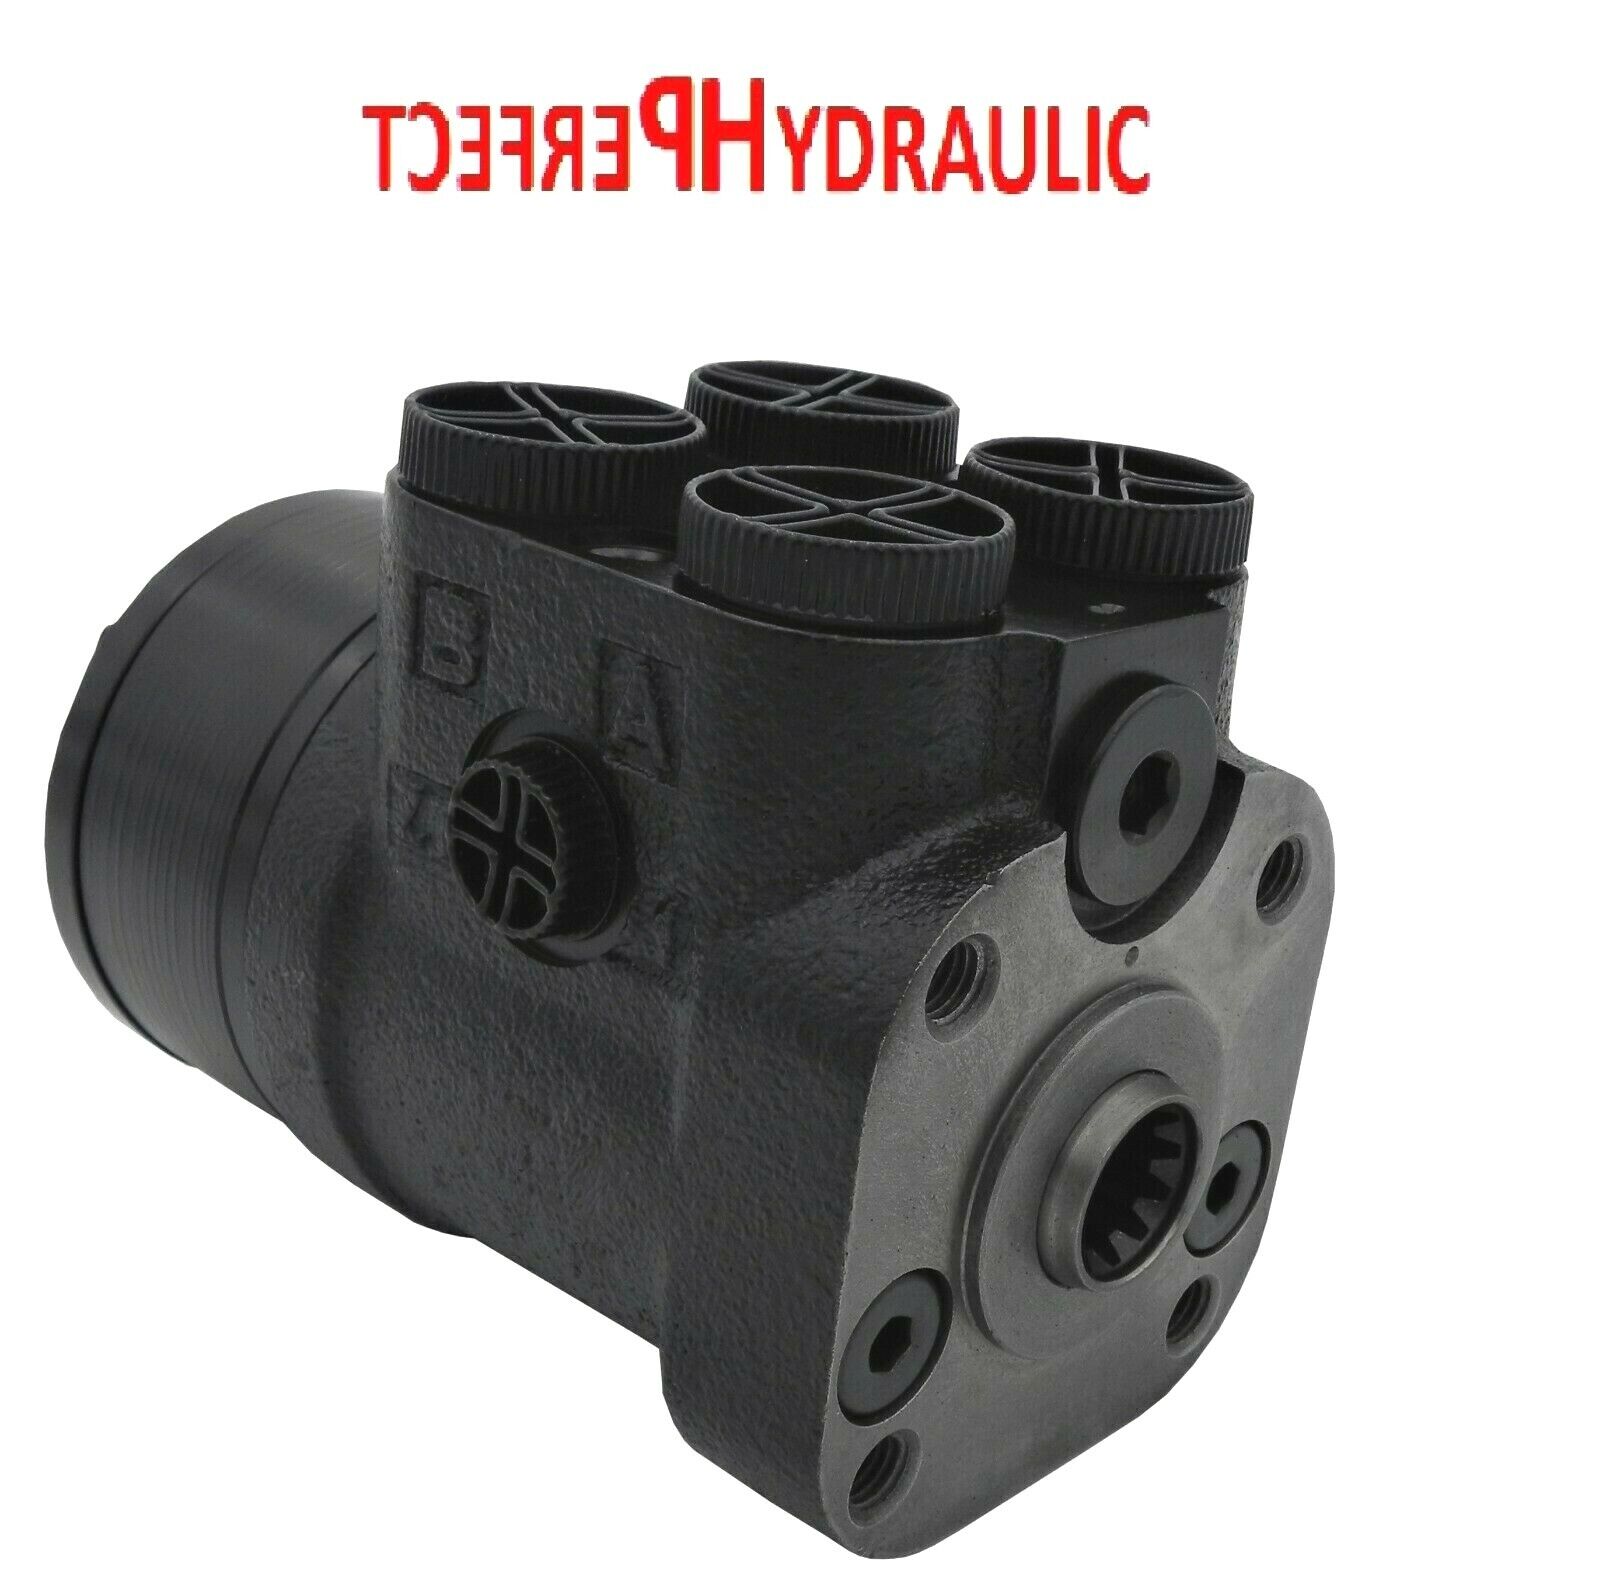 OSPB steering units from 50 to 199 cc/rev